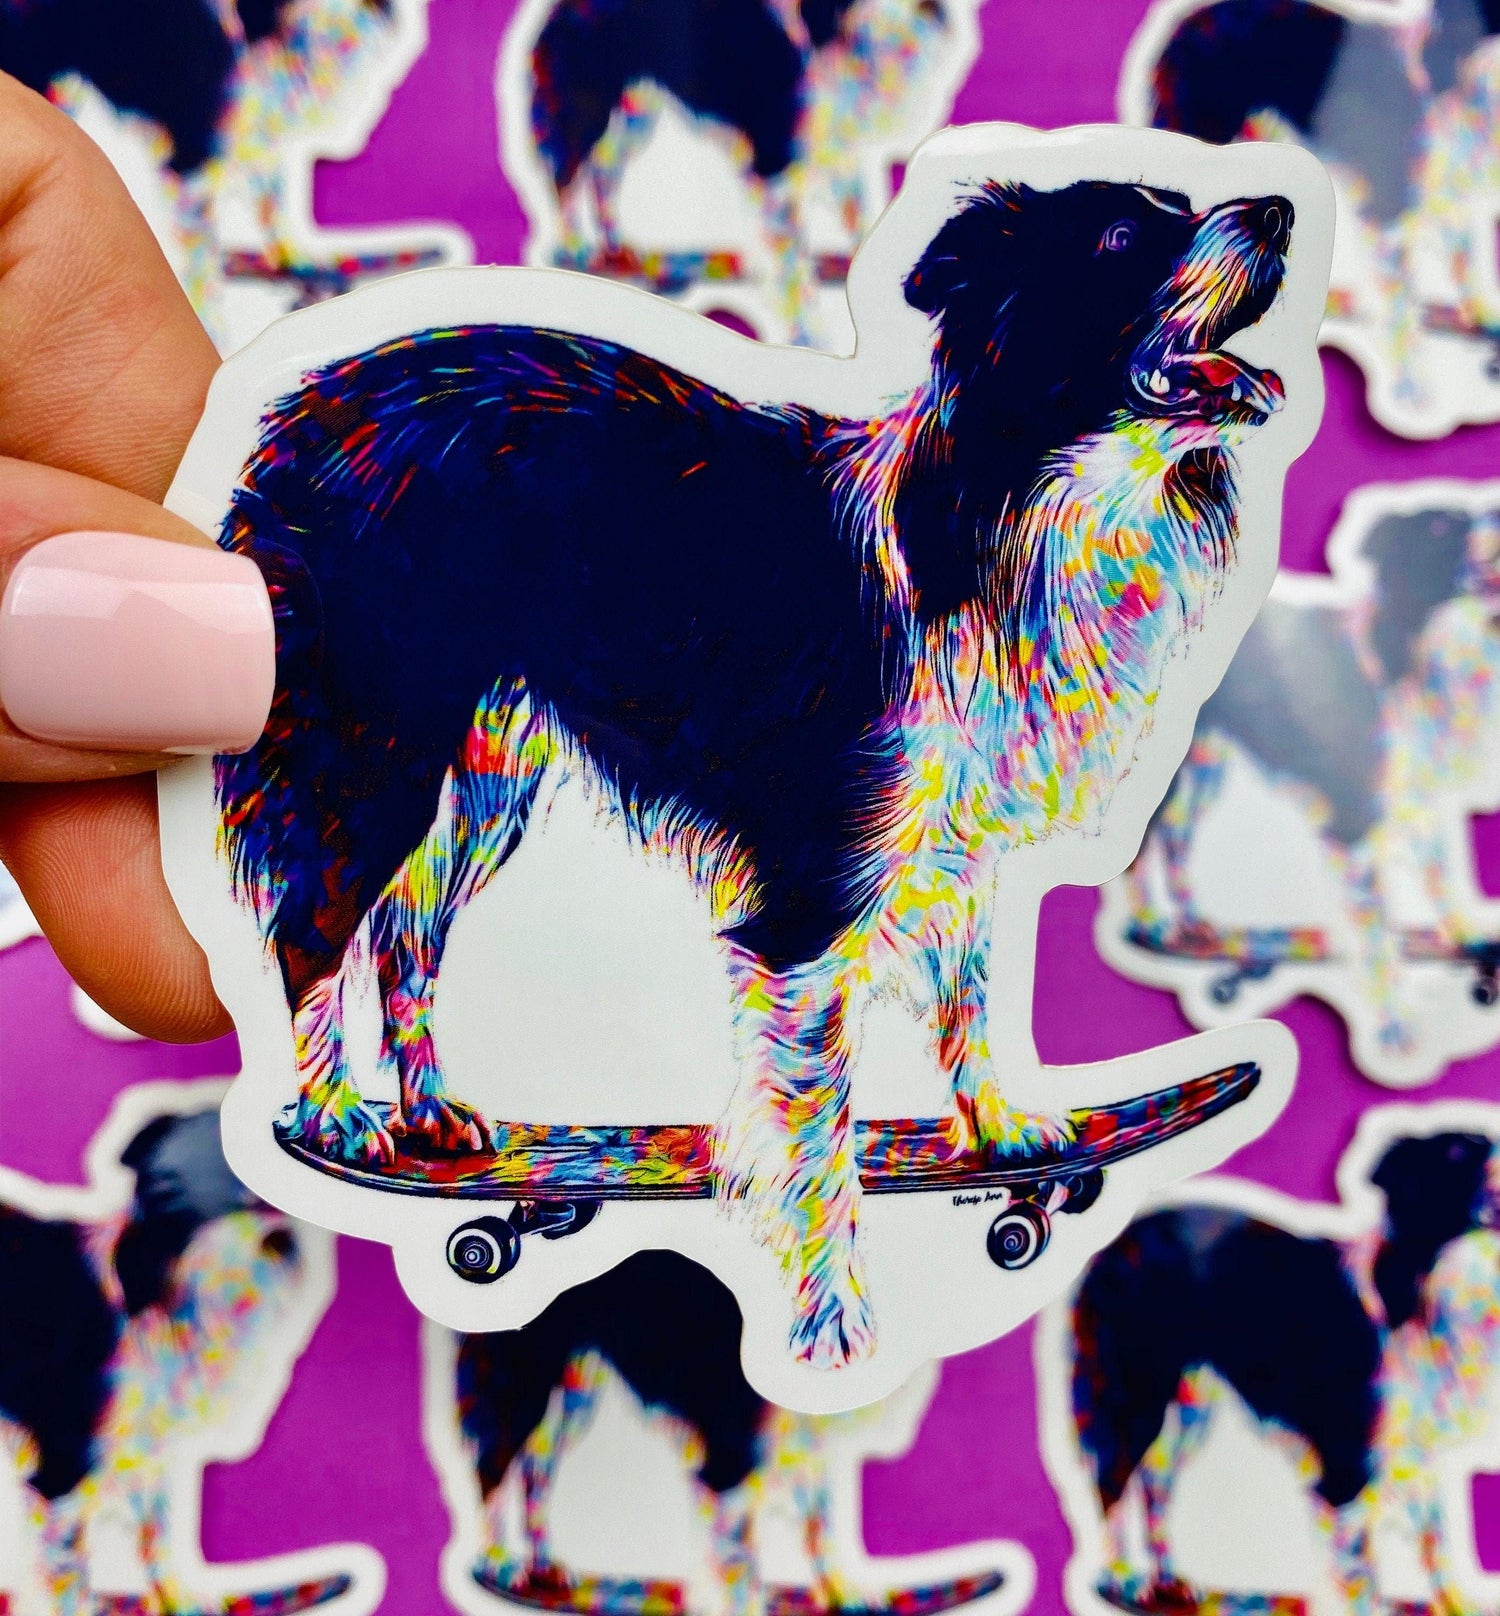 Border Collie Skateboard Sticker Colorful Abstract Cute Border Collie Dog Decal for Car, Hydroflask, Fun Border Collie on a Skateboard Art - Ottos Grotto :: Stickers For Your Stuff